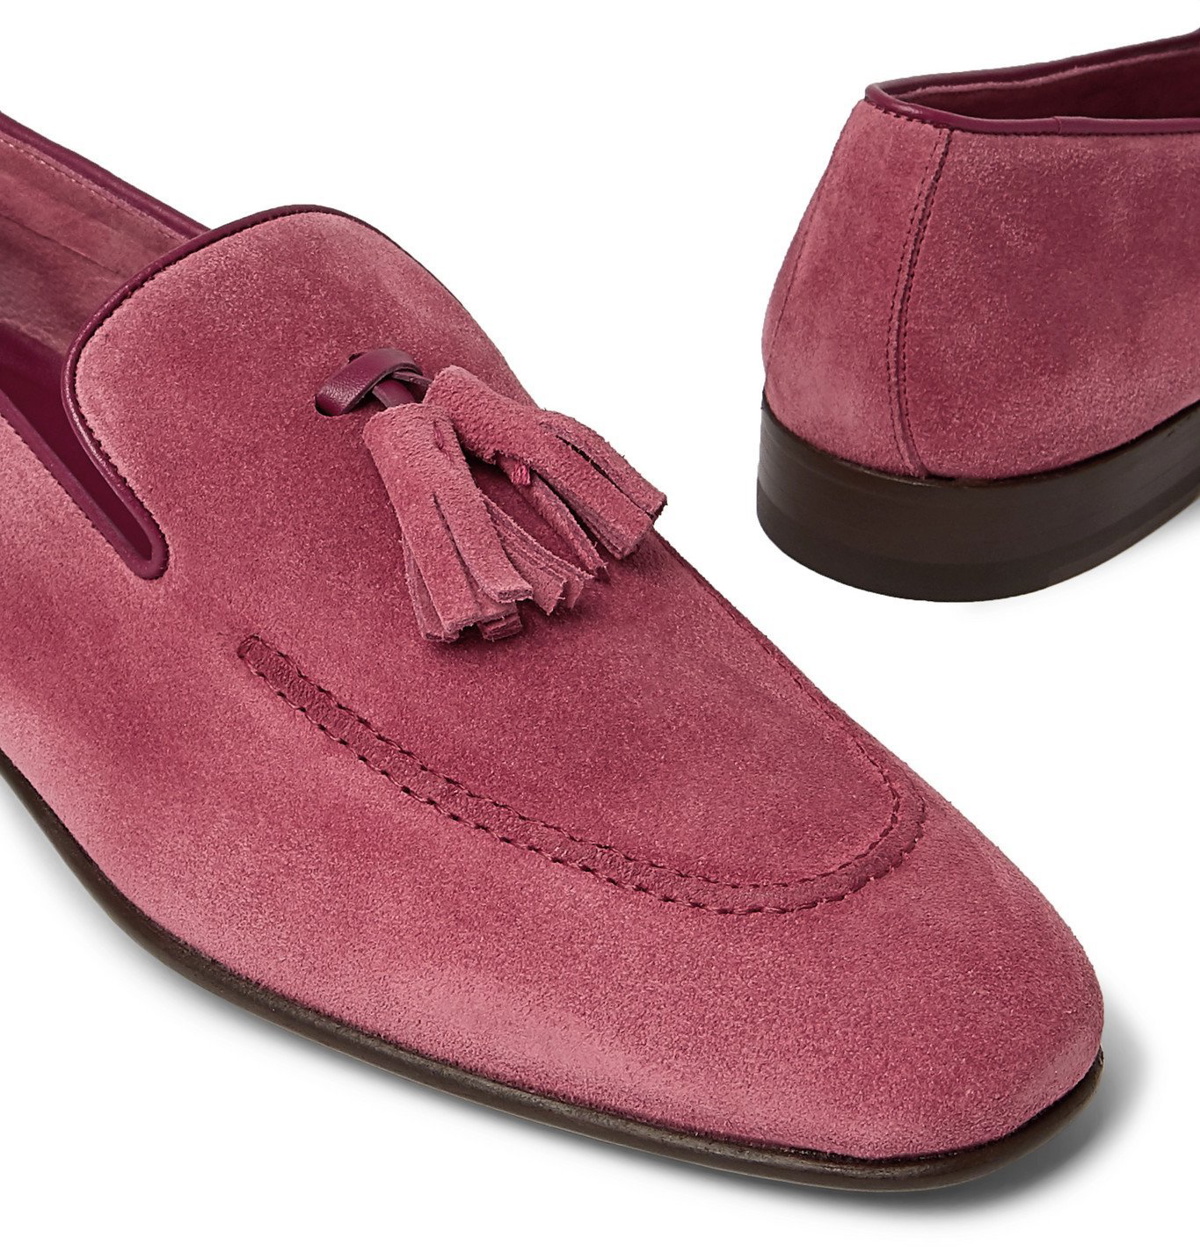 Manolo Blahnik Men's Chester Suede Loafers